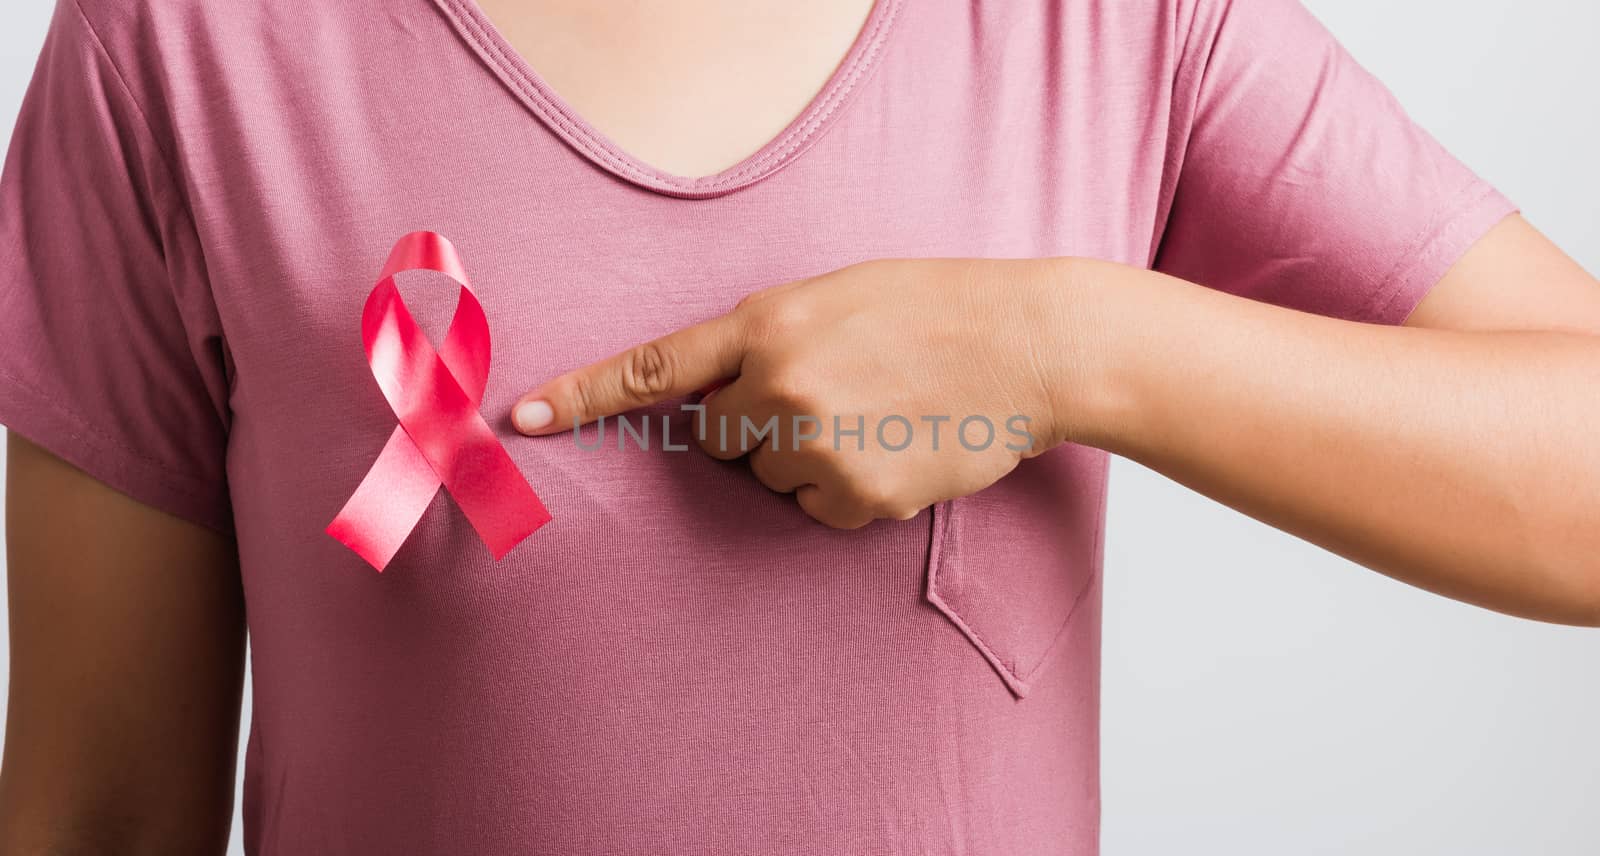 Breast cancer awareness healthcare and medicine concept. Close up Asian woman wear pink shirt pointing finger to pink breast cancer awareness ribbon, studio shot isolated on white background